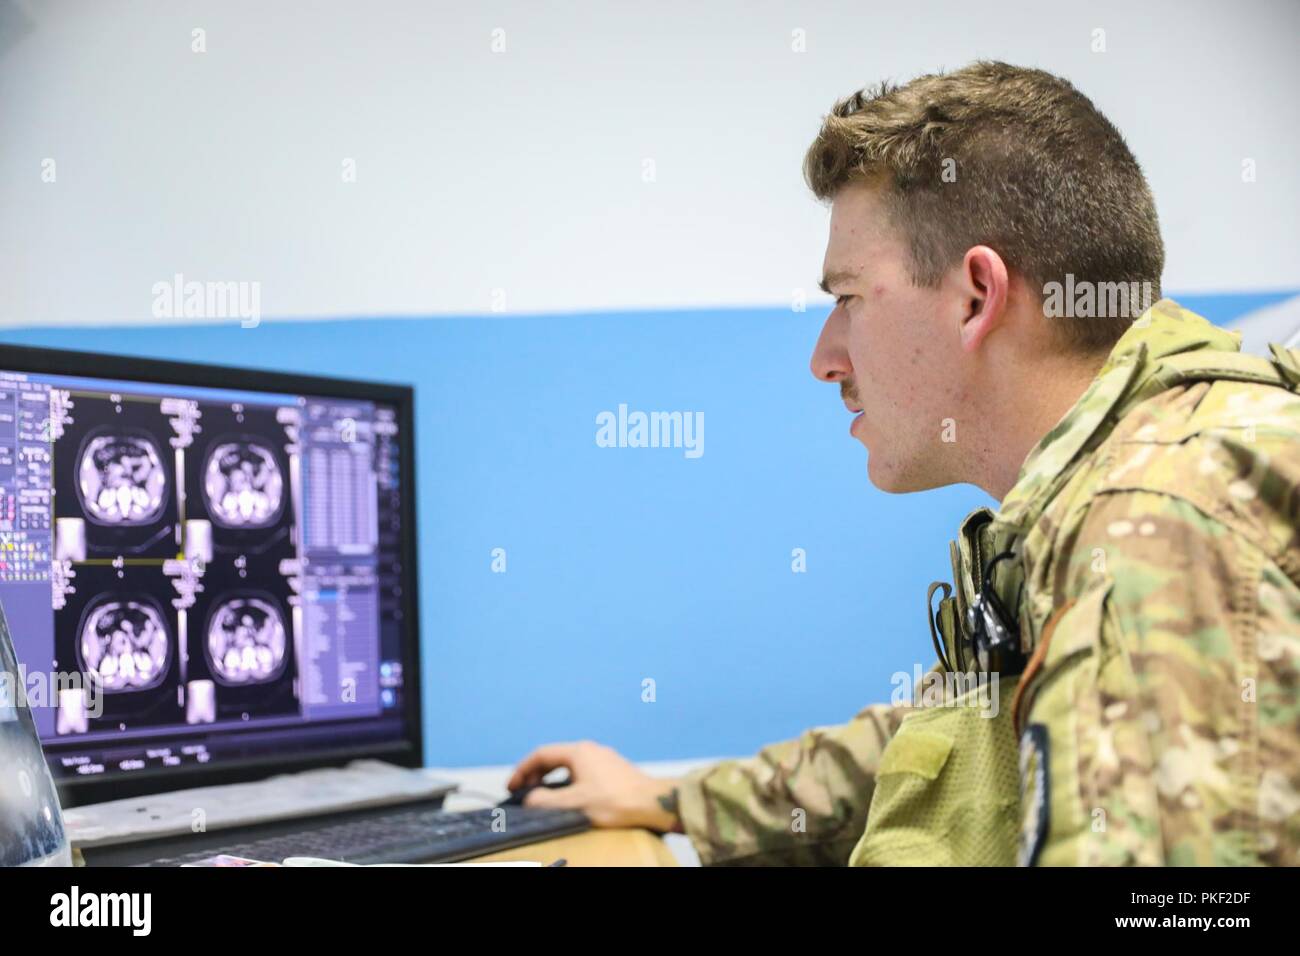 KANDAHAR PROVINCE, Afghanistan (August 5, 2018) -- U.S. Navy Hospital Corpsman 3rd Class Thomas Fite, a radiology technician for Kandahar Airfield NATO Role III Multinational Medical Unit, looks over results of an x-ray, August 5, 2018, to help his Afghan counterparts during a medical advisory visit at Kandahar Regional Military Hospital, Camp Hero in Kandahar, Afghanistan. Staff members from the Role III conduct routine visits to KRMH to train and advise Afghan medical staff. Stock Photo